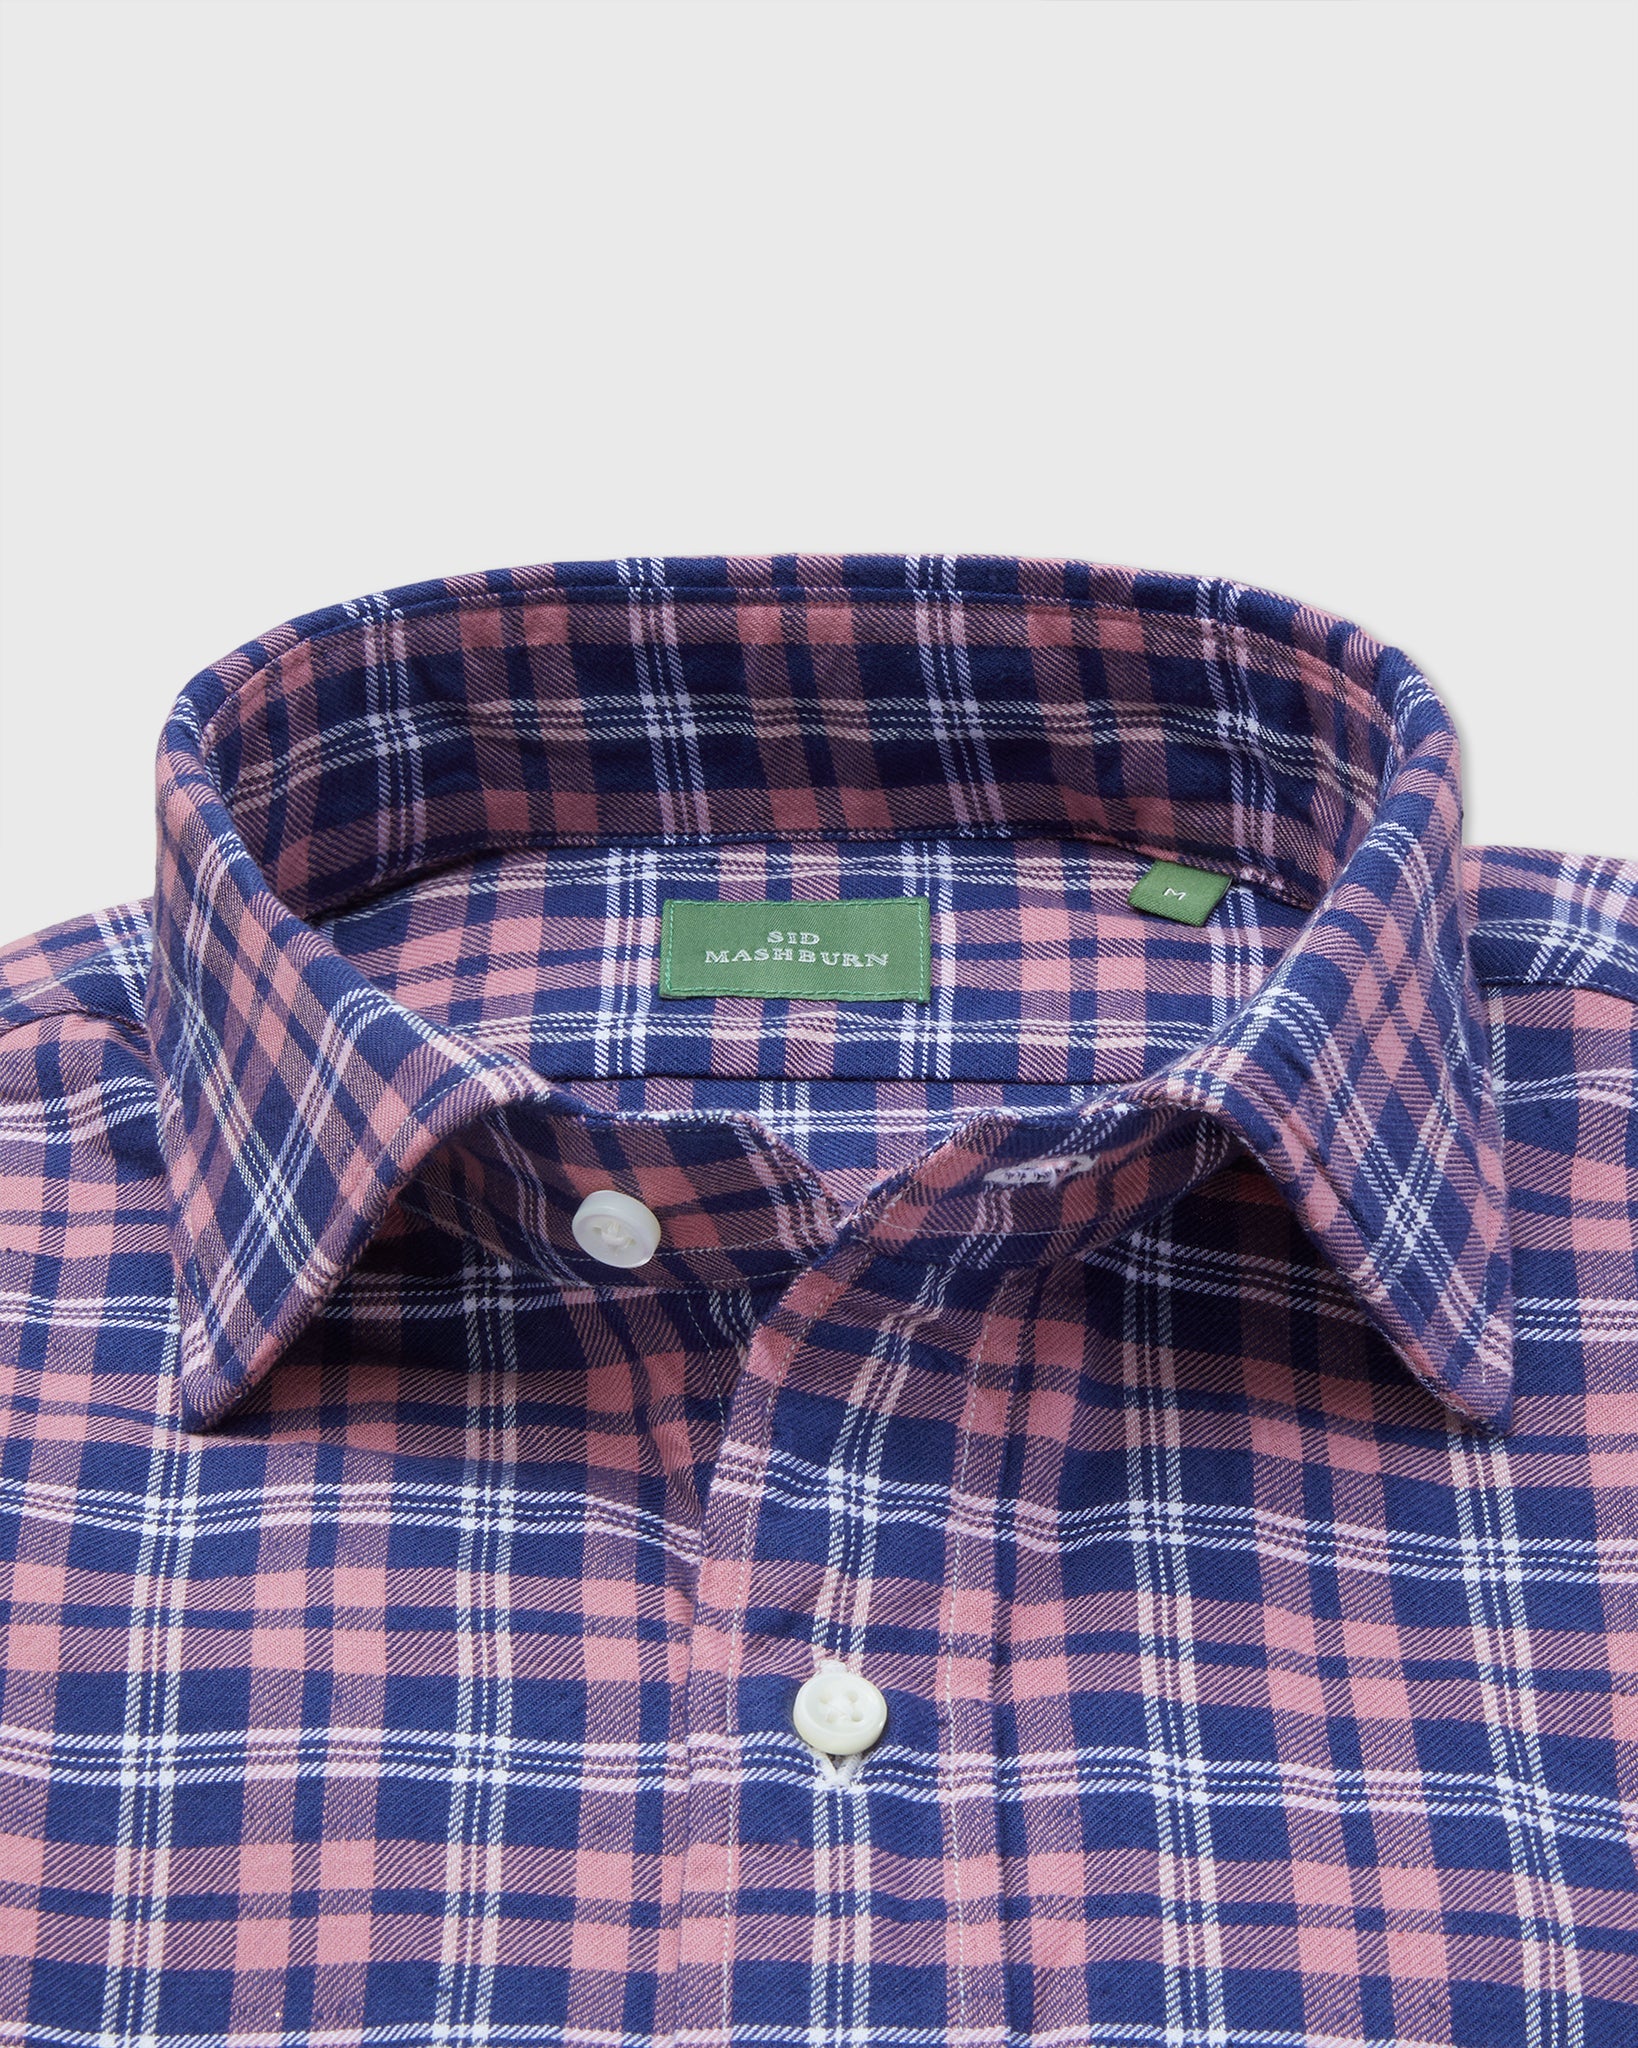 Spread Collar Sport Shirt in Salmon/Navy Plaid Brushed Twill